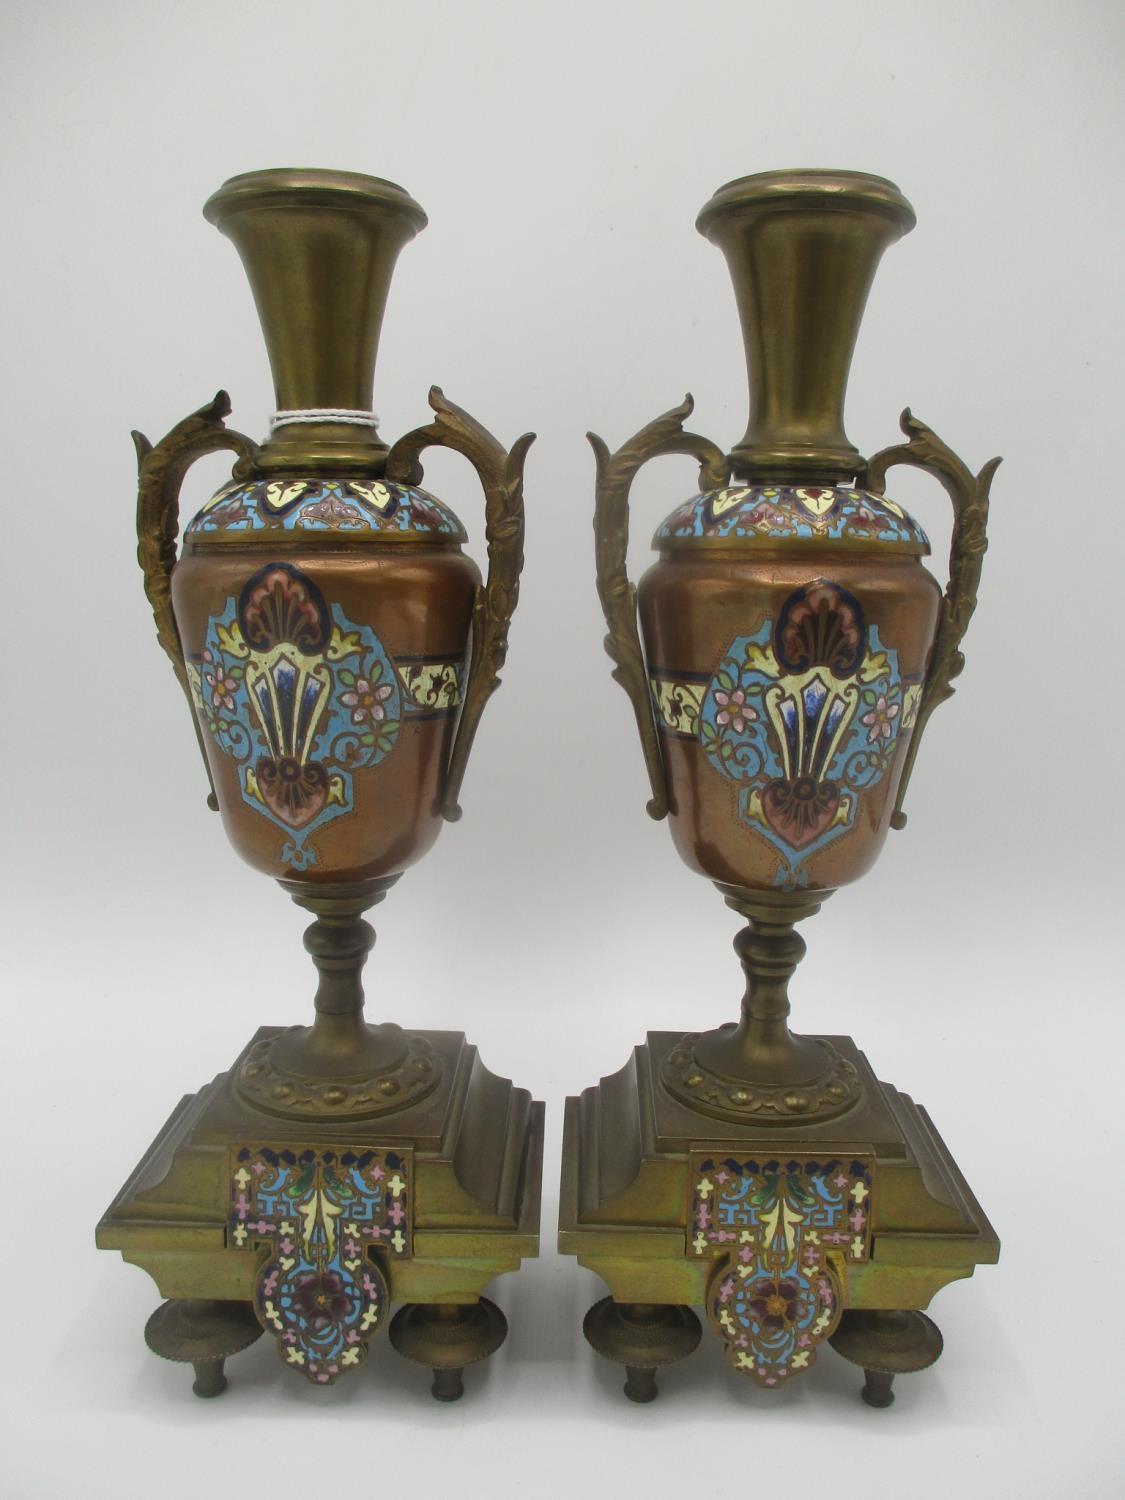 A late 19th century gilt metal cloisonne clock garniture set, the clock of architectural form having - Image 7 of 7